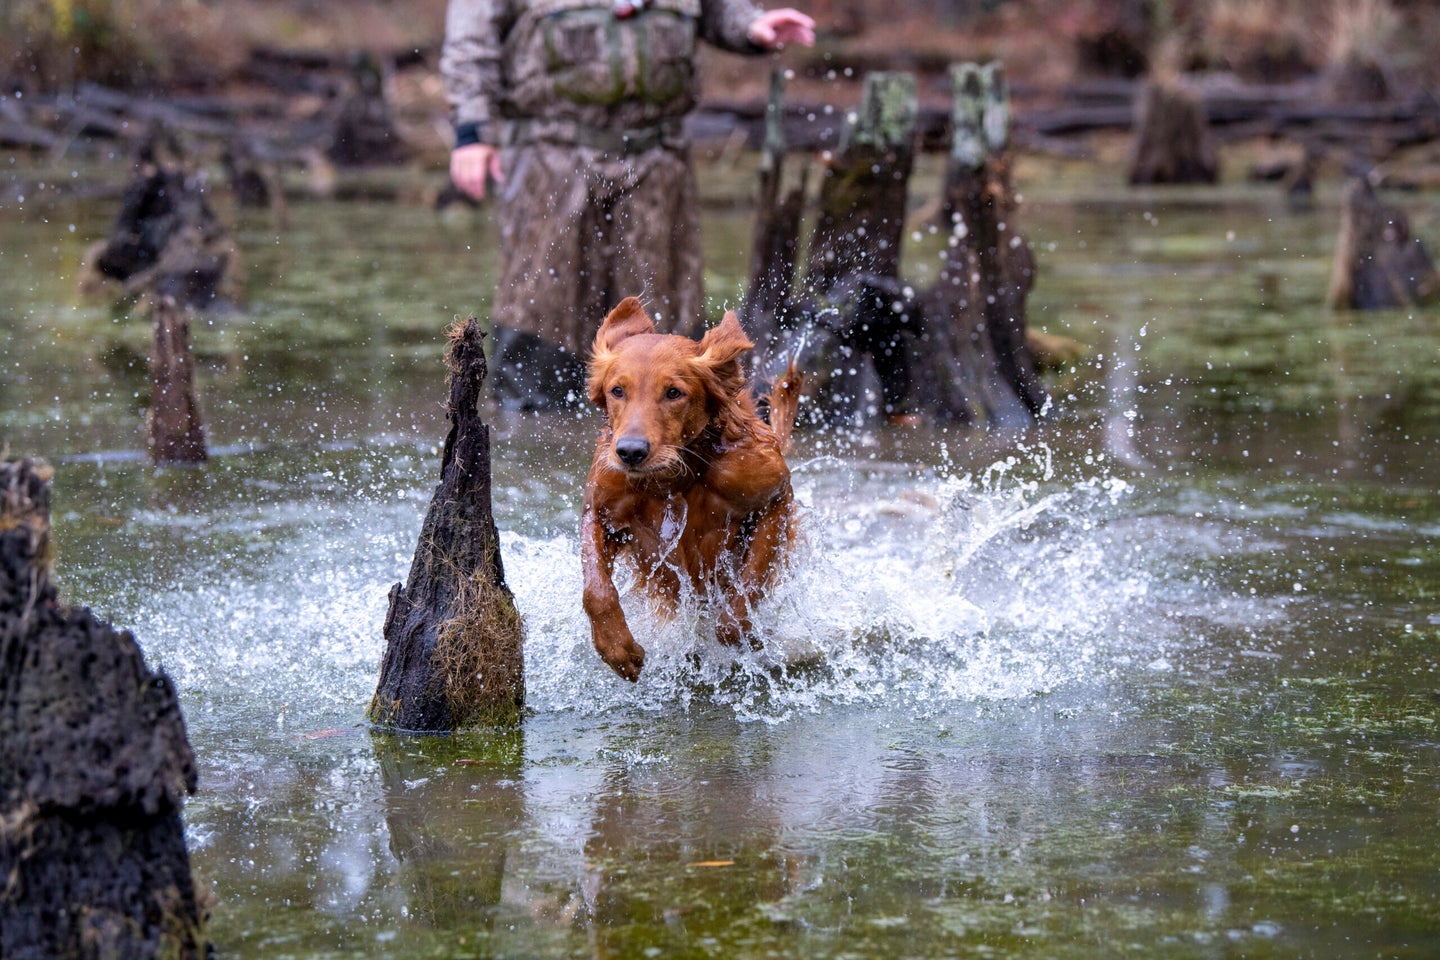 A deep red Golden Retriever runs through water while their owner gives commands in the
background.